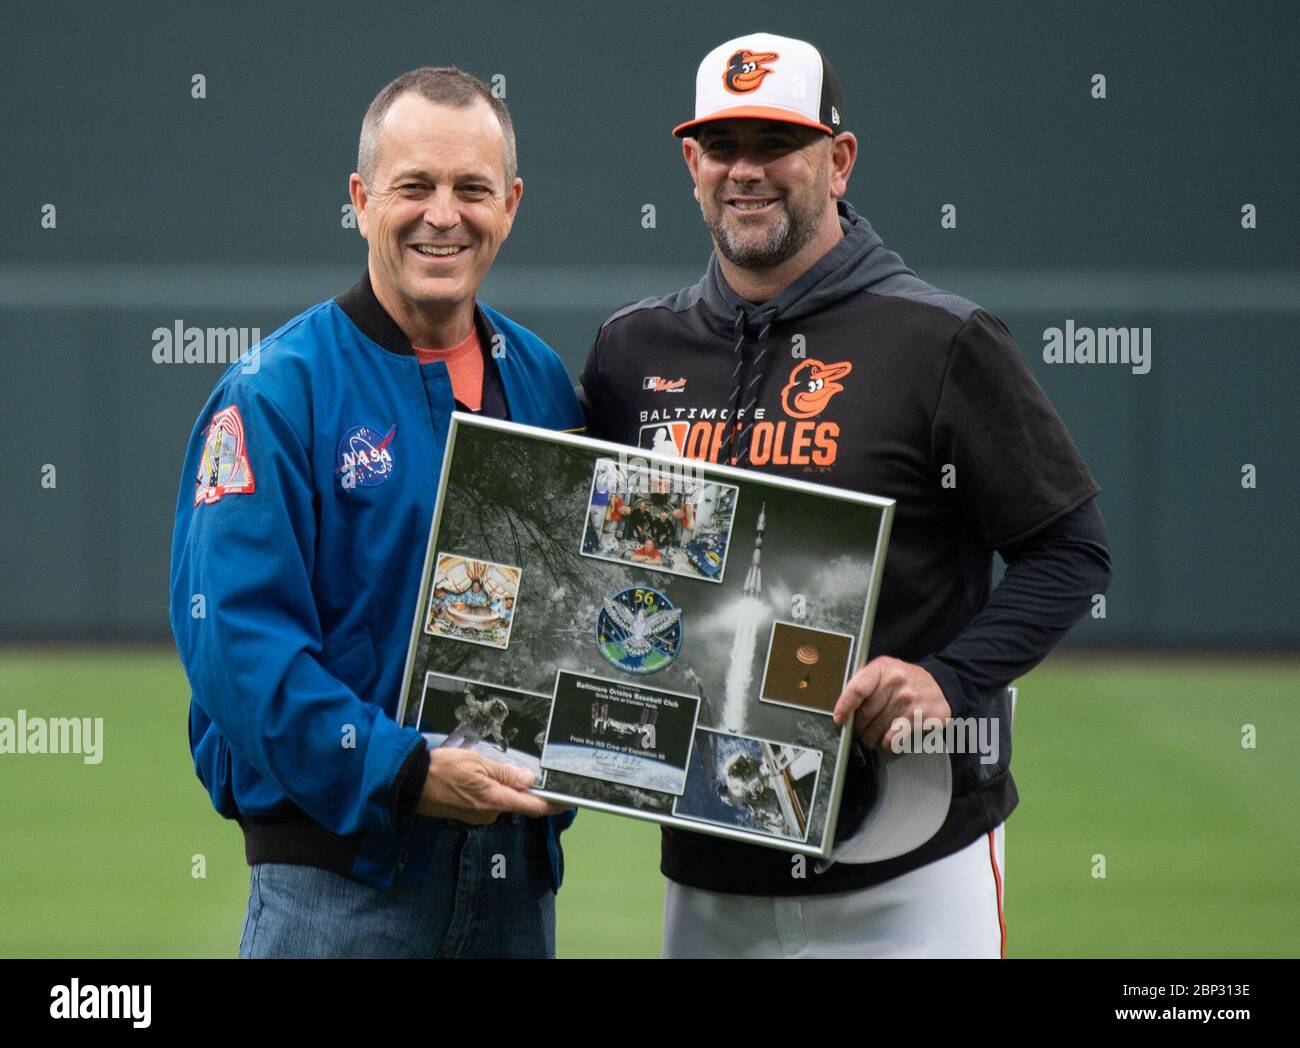 Astronaut Ricky Arnold at Baltimore Orioles Game  NASA astronaut and Maryland native Ricky Arnold presents a montage of images from his mission and a Baltimore Orioles hat that was flown aboard the International Space Station to Baltimore Orioles manager Brandon Hyde before the Tampa Bay Rays take on the Baltimore Orioles, Saturday, May 4, 2019 at Camden Yards in Baltimore, Md. During Arnold’s 197 days onboard the International Space Station, as part of Expeditions 55 and 56, he ventured outside the space station on three spacewalks in addition to conducting numerous experiments and educationa Stock Photo